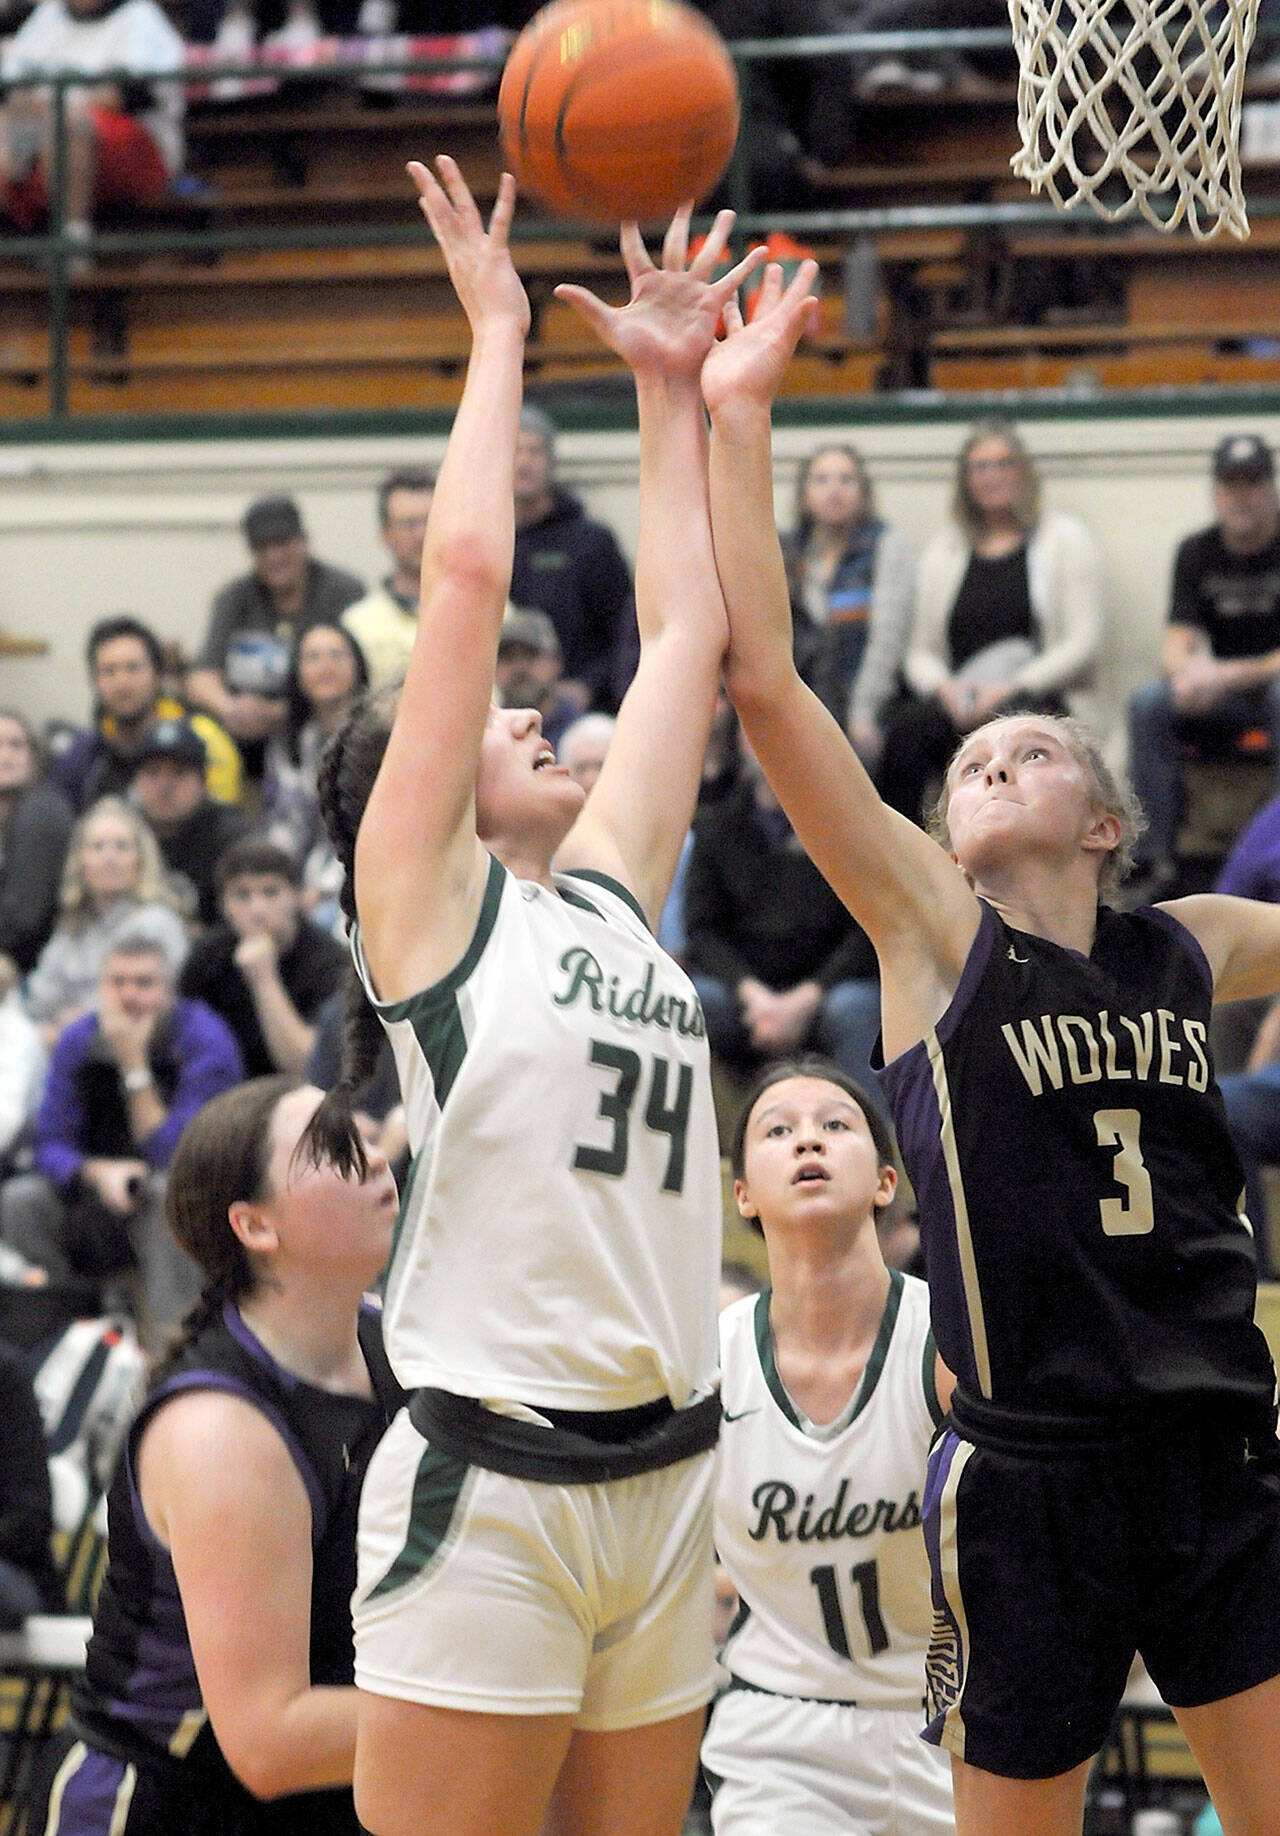 Photo by Keith Thorpe/Olympic Peninsula News Group / Port Angeles’ Lexie Smith, left, and Sequim’s Jolene Vaara vie for a rebound as Sammie Bacon of Sequim, lower left, and Lindsay Smith, rear, look on during a Jan. 10 game at Port Angeles High School.